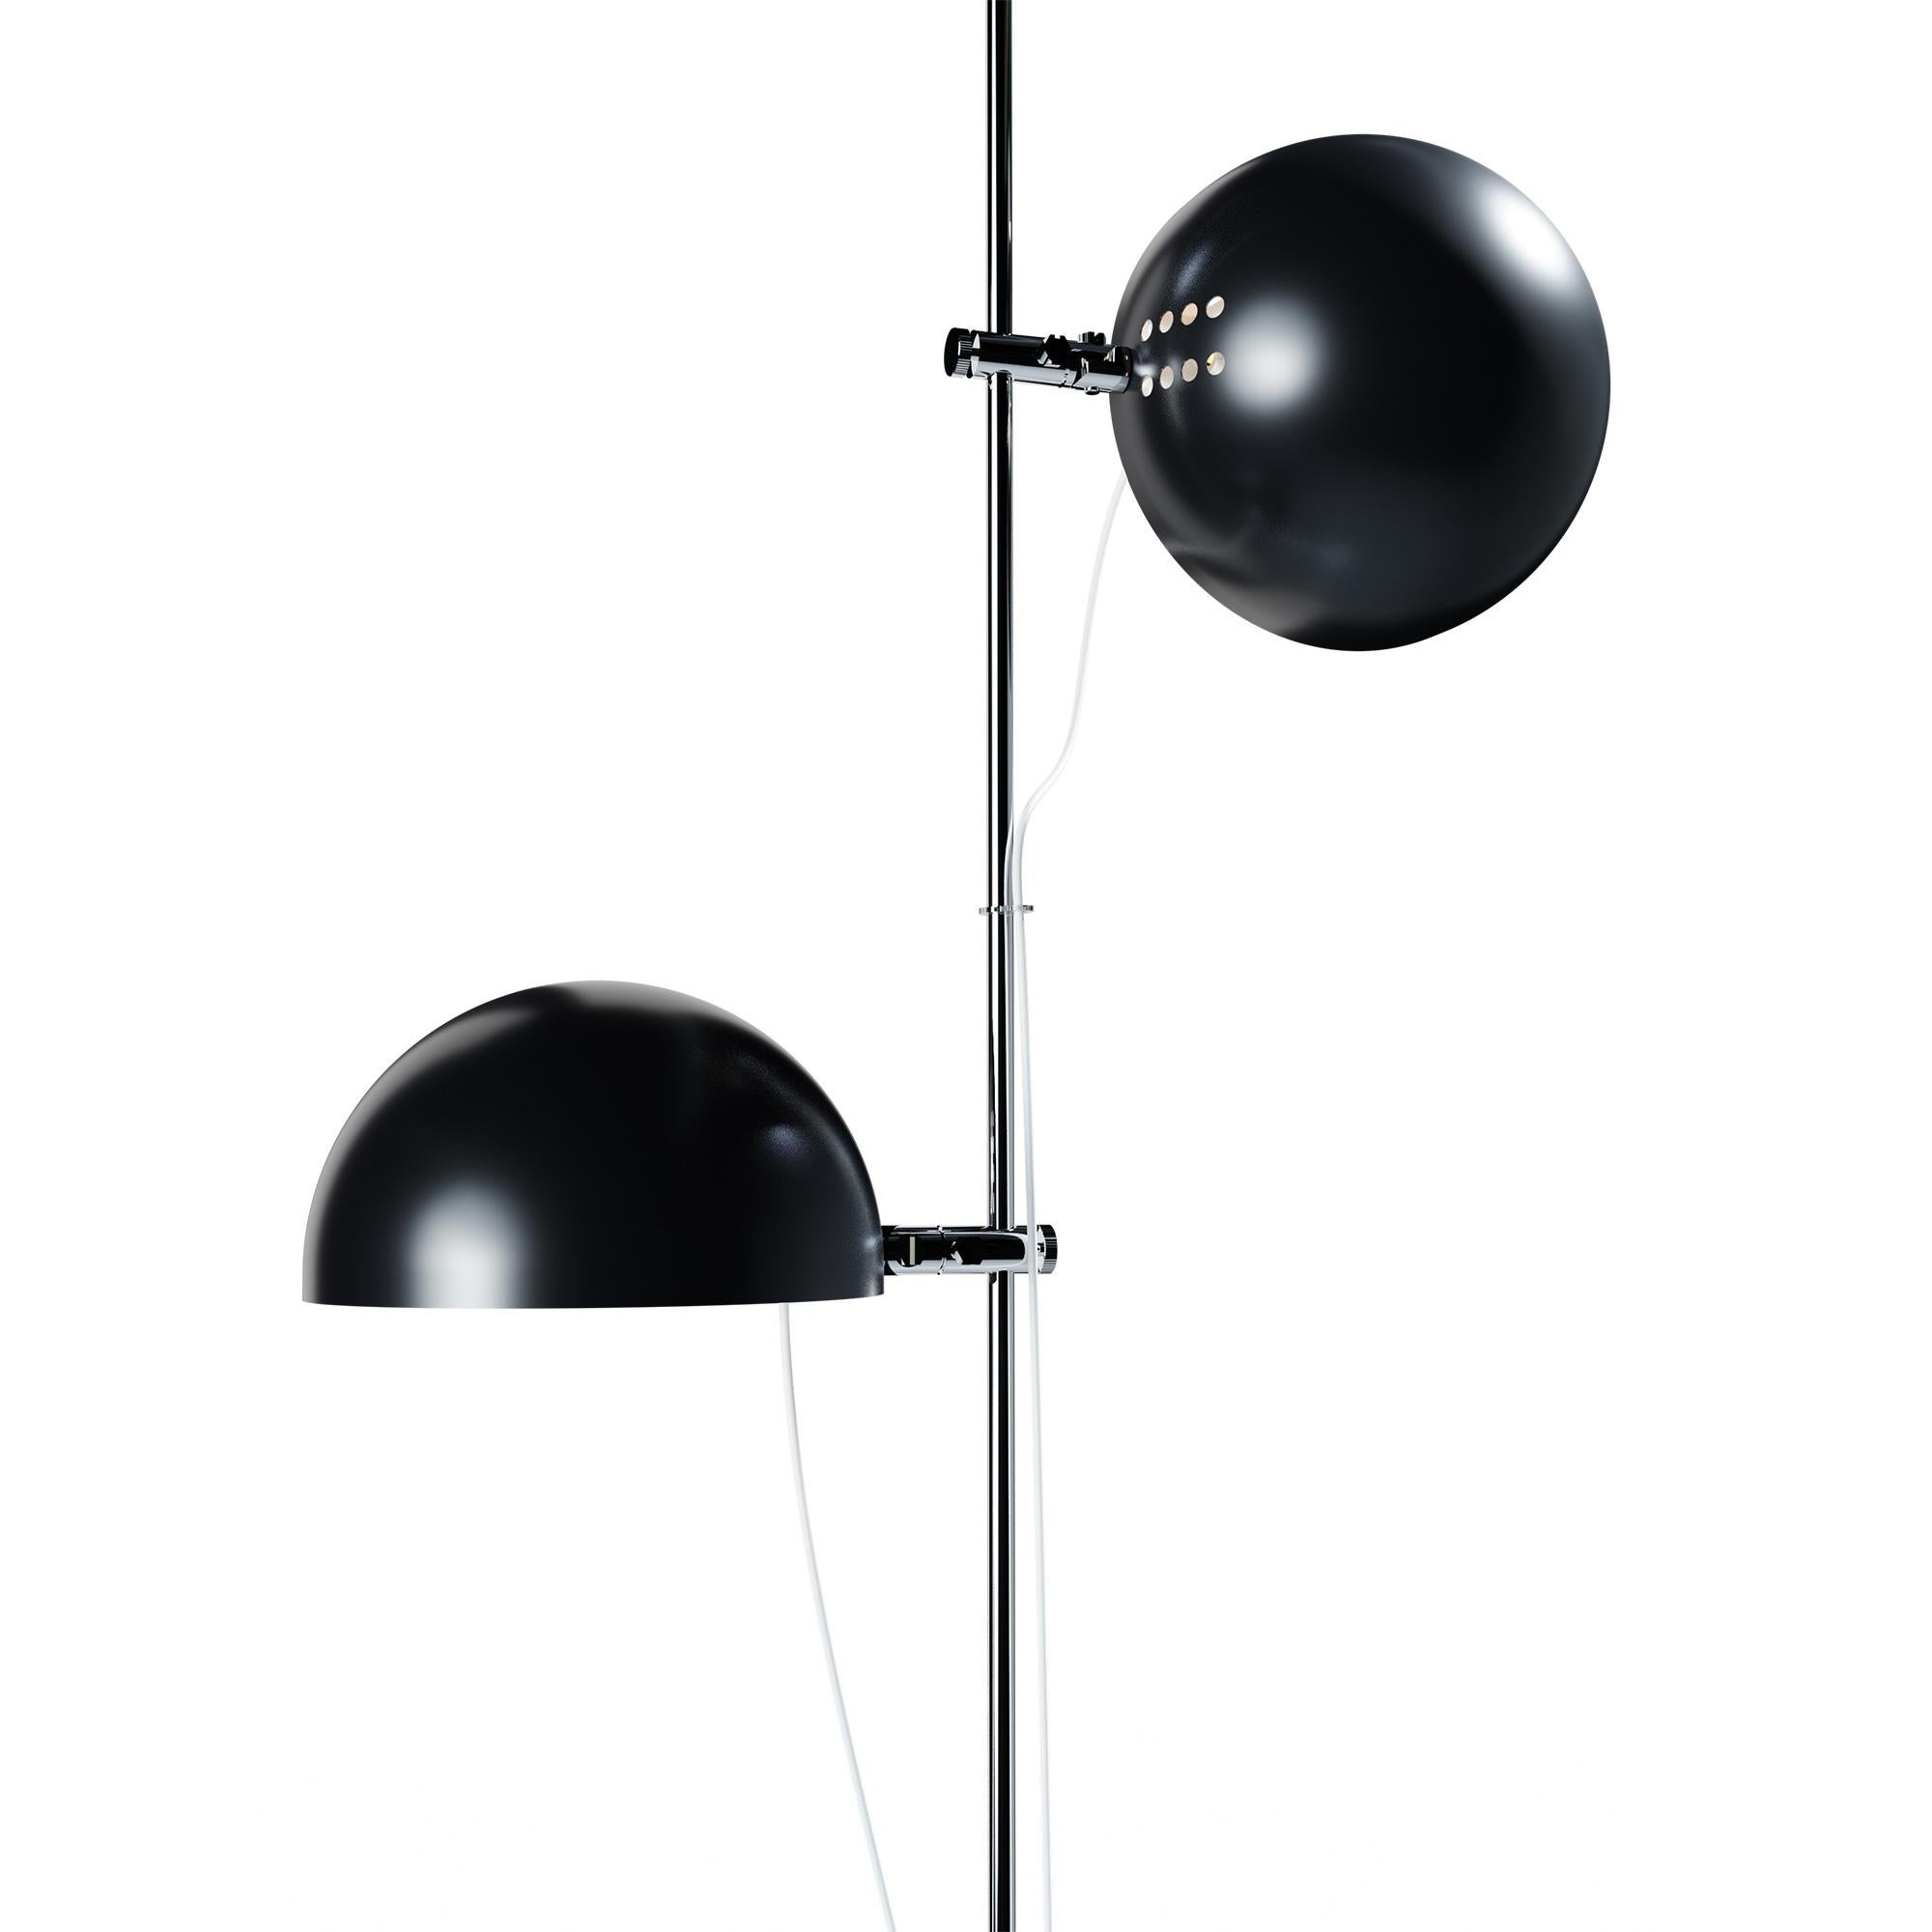 Metal A23 Floor Lamp by Disderot
Limited Edition. 
Designed by Alain Richard
Dimensions: Ø 40 x H 150 cm.
Materials: Lacquered metal.

Delivered with authentication certificate. Made in France. Available in different color options. Custom options